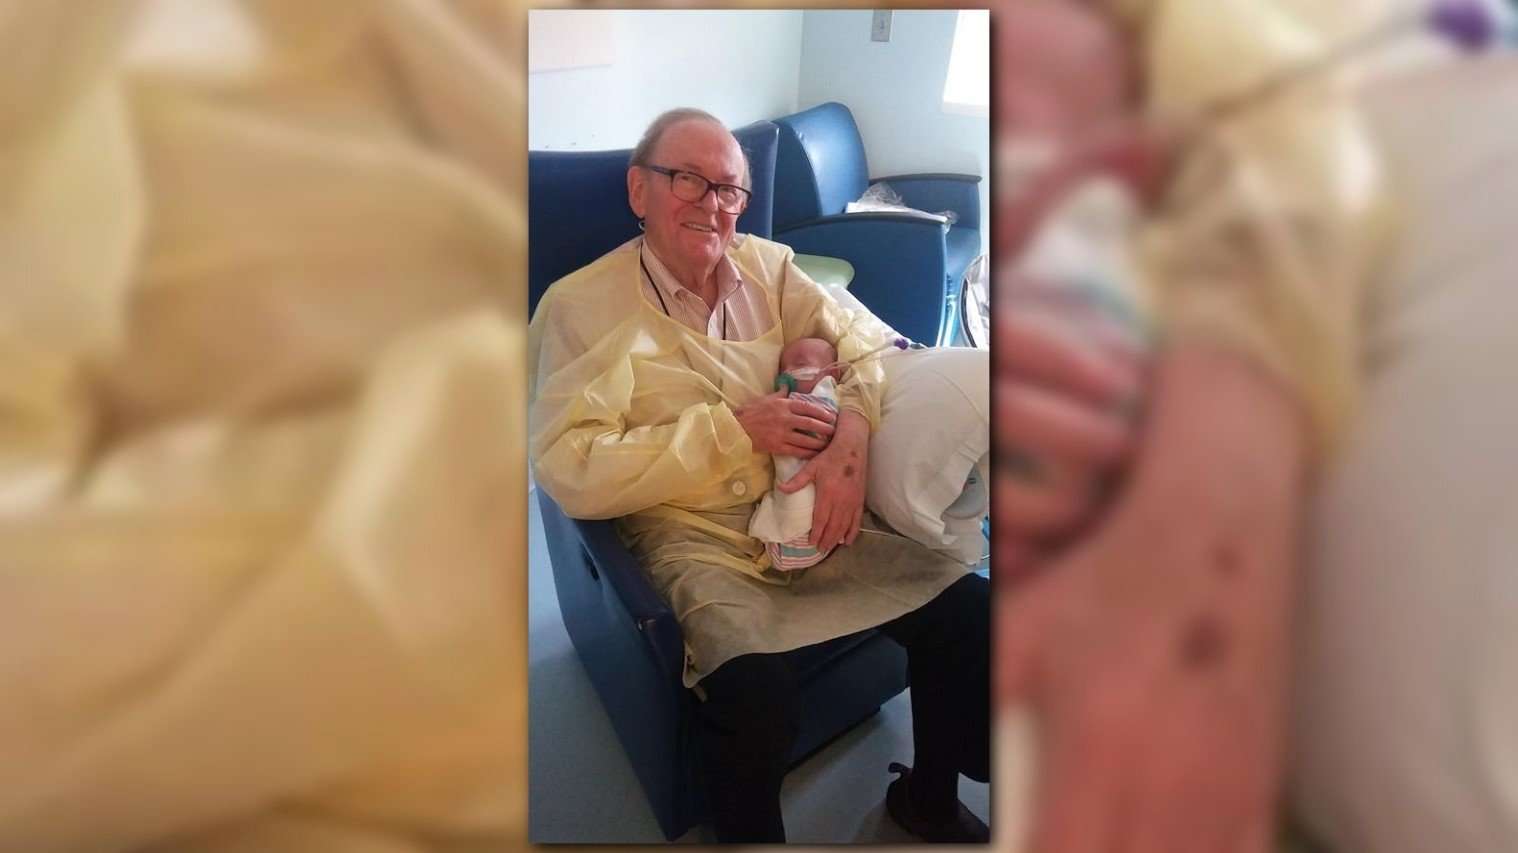 image for 'ICU GRANDPA' SPREADS JOY, COMFORTS SMALLEST PATIENTS AT CHOA